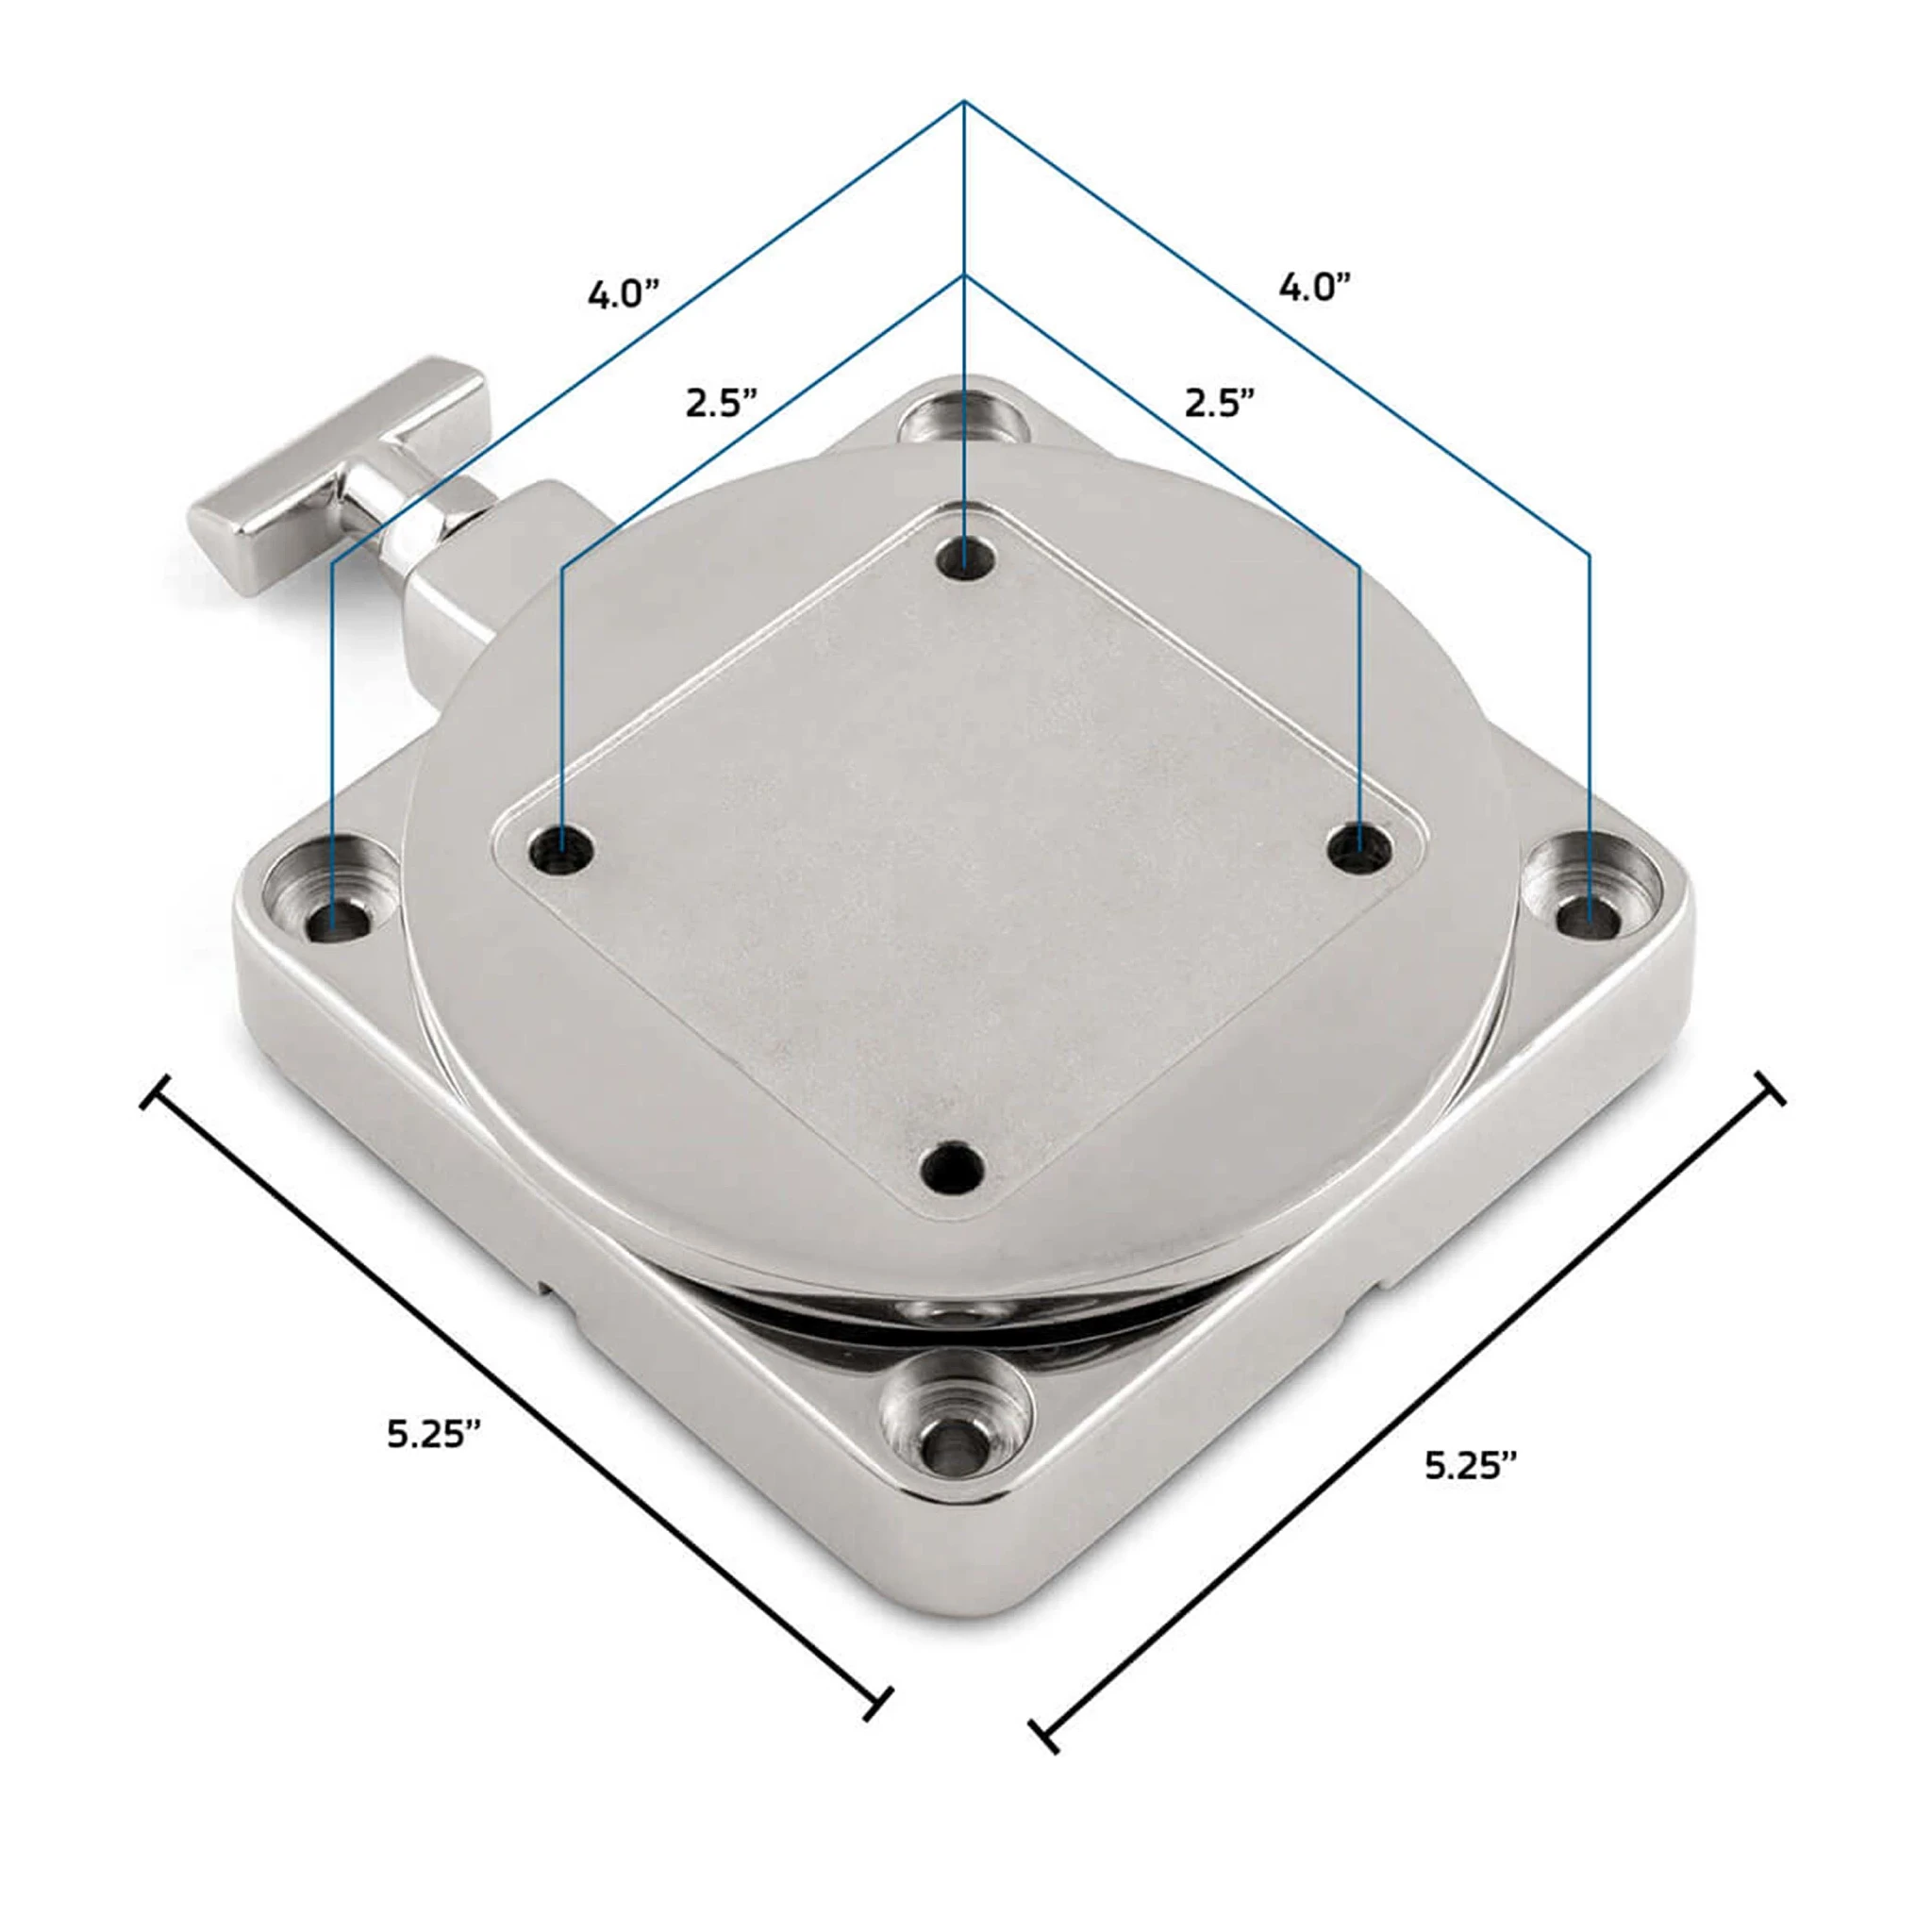 Stainless steel swivel base top view with measurements